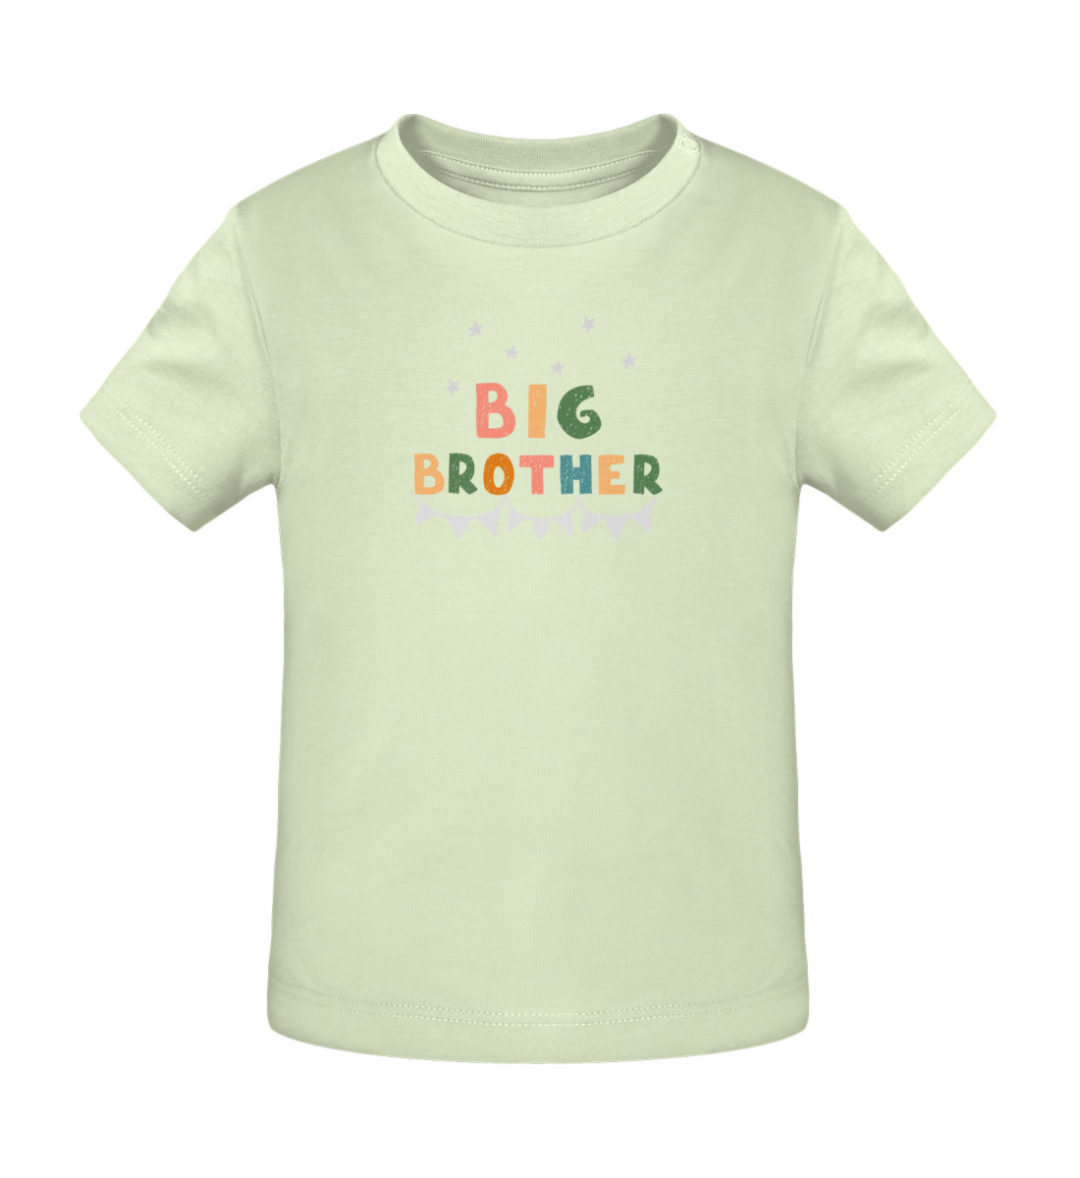 Big Brother - Baby Creator T-Shirt ST/ST-7105